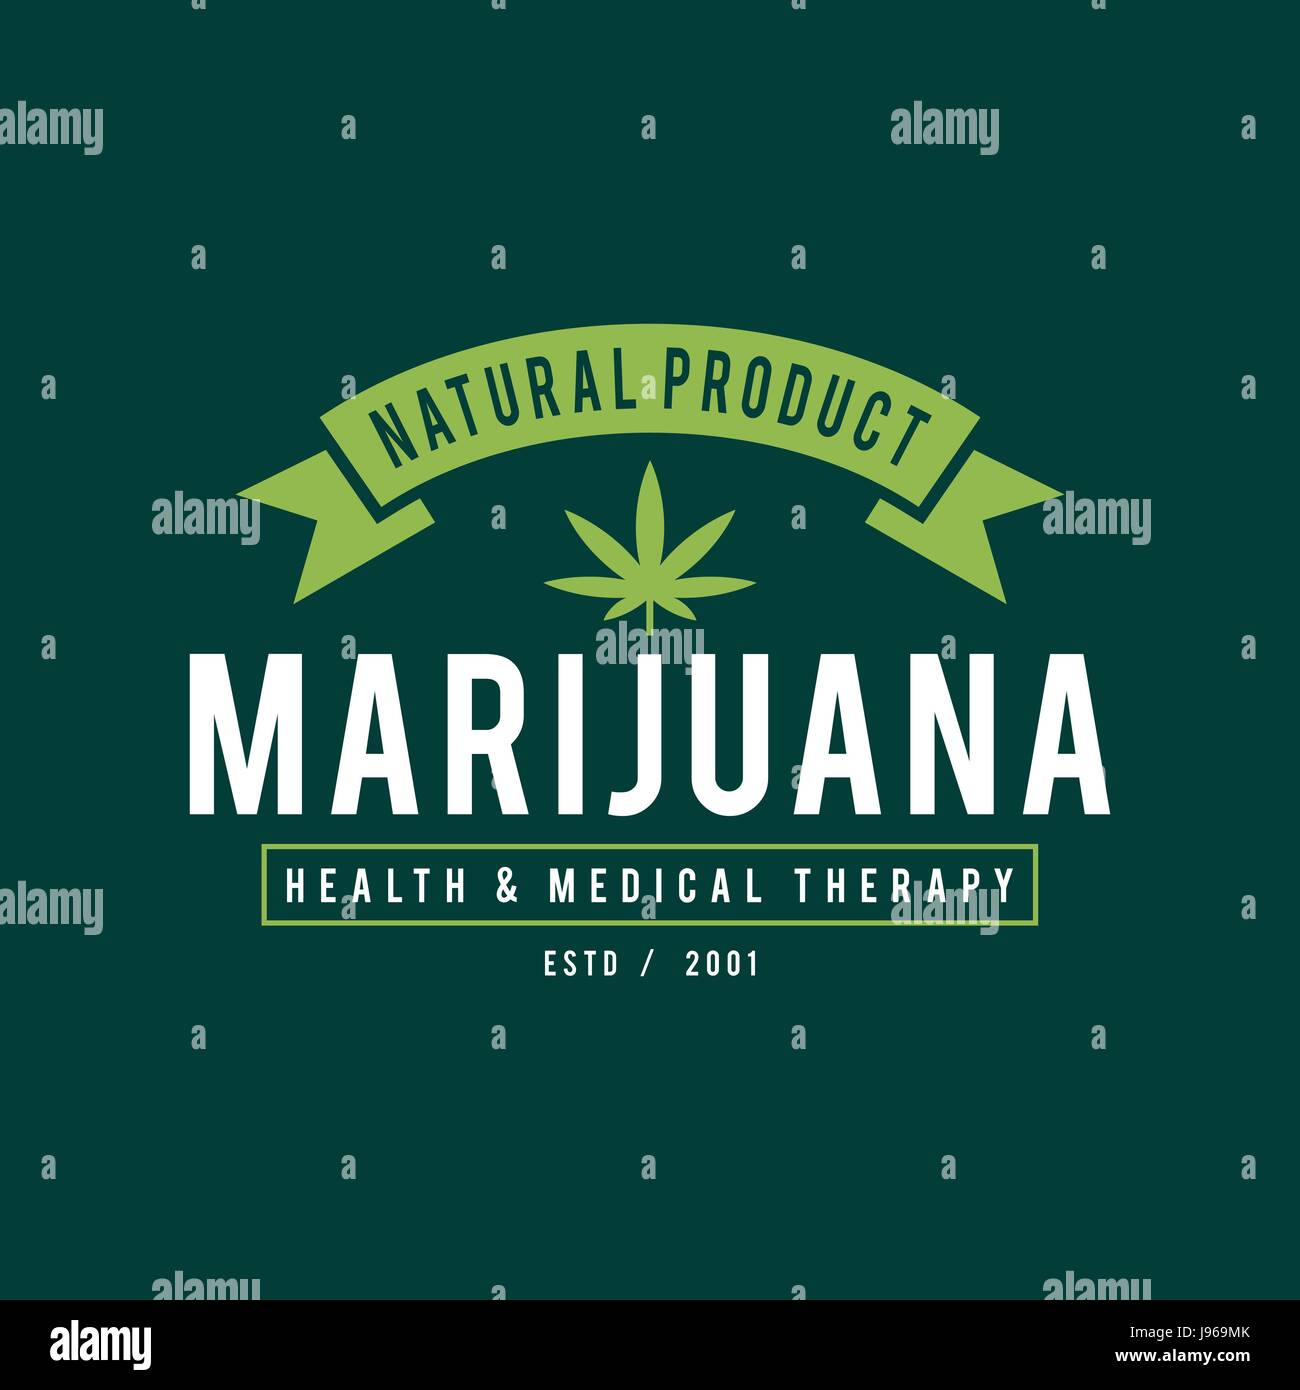 Vintage Marijuana label design, Cannabis Health and Medical therapy, vector illustration Stock Vector